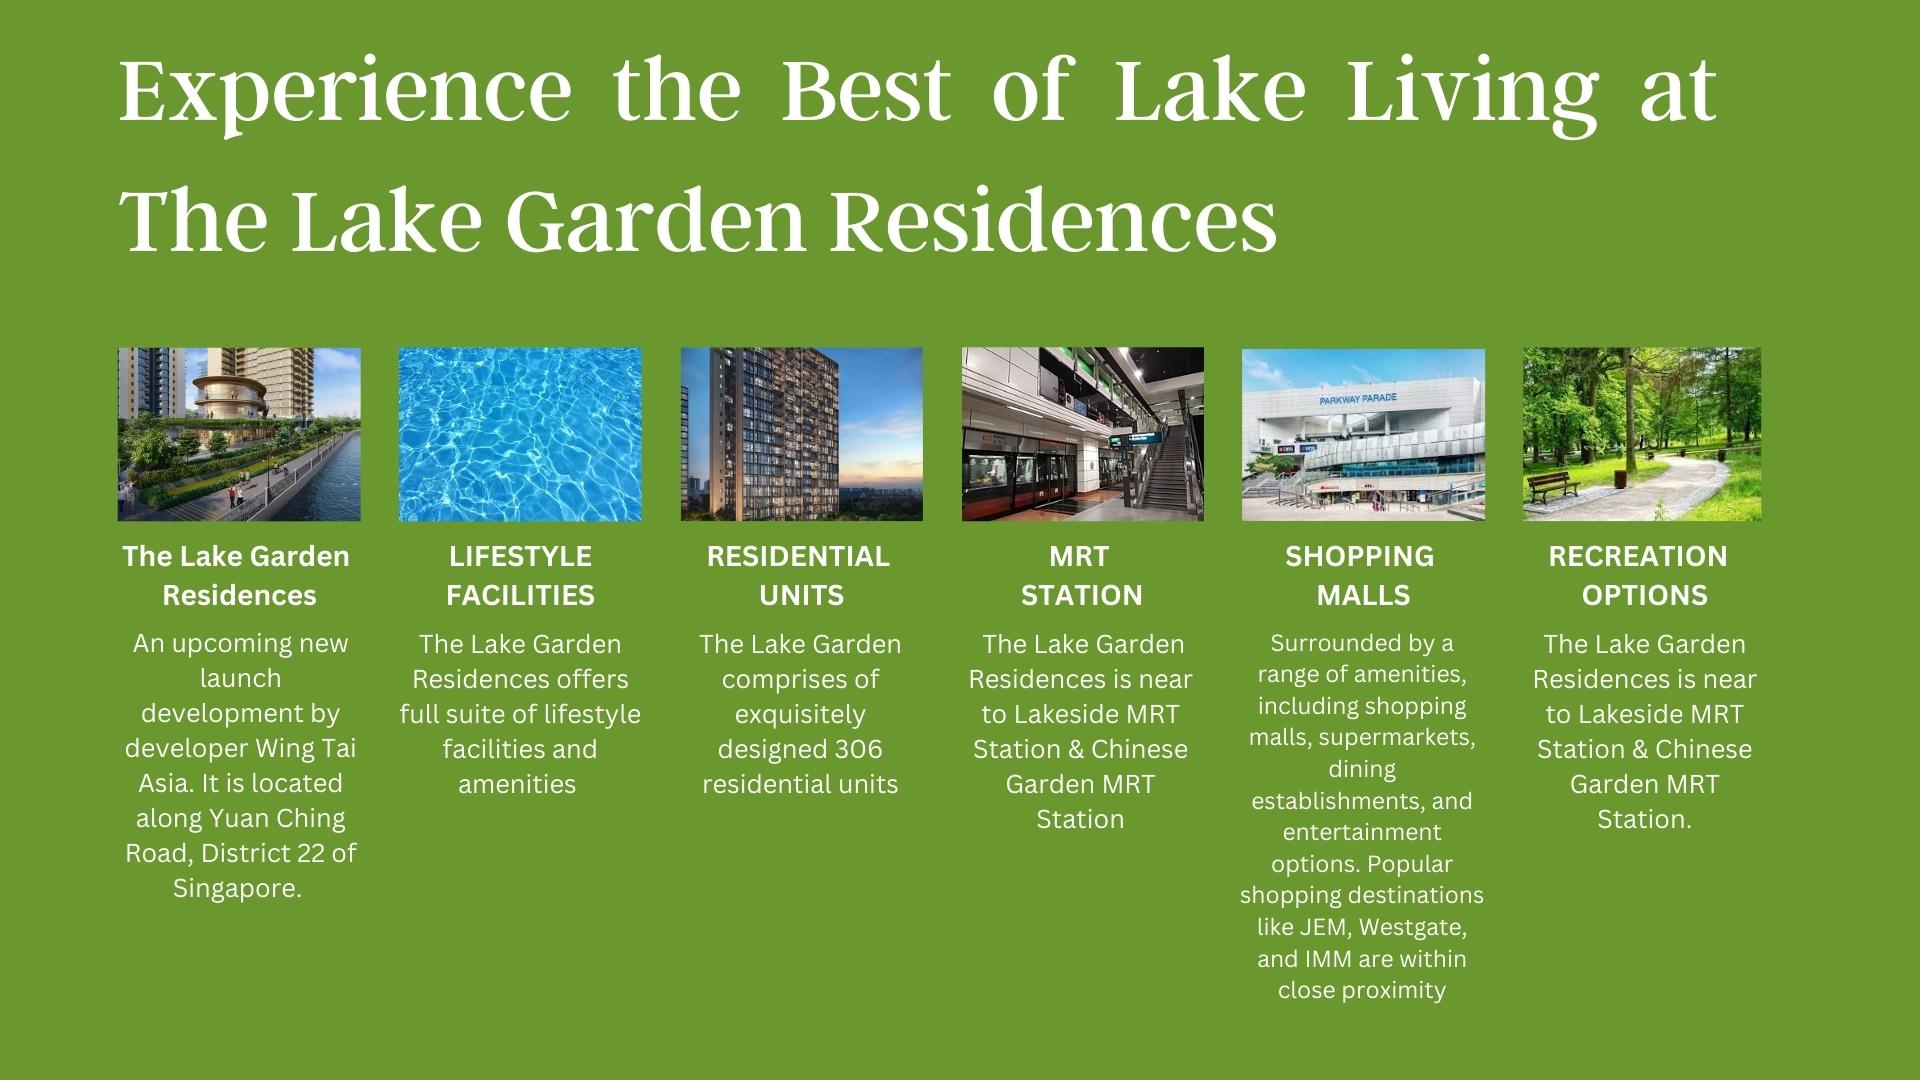 the-lake-garden-residences-yuan-ching-road-introduction